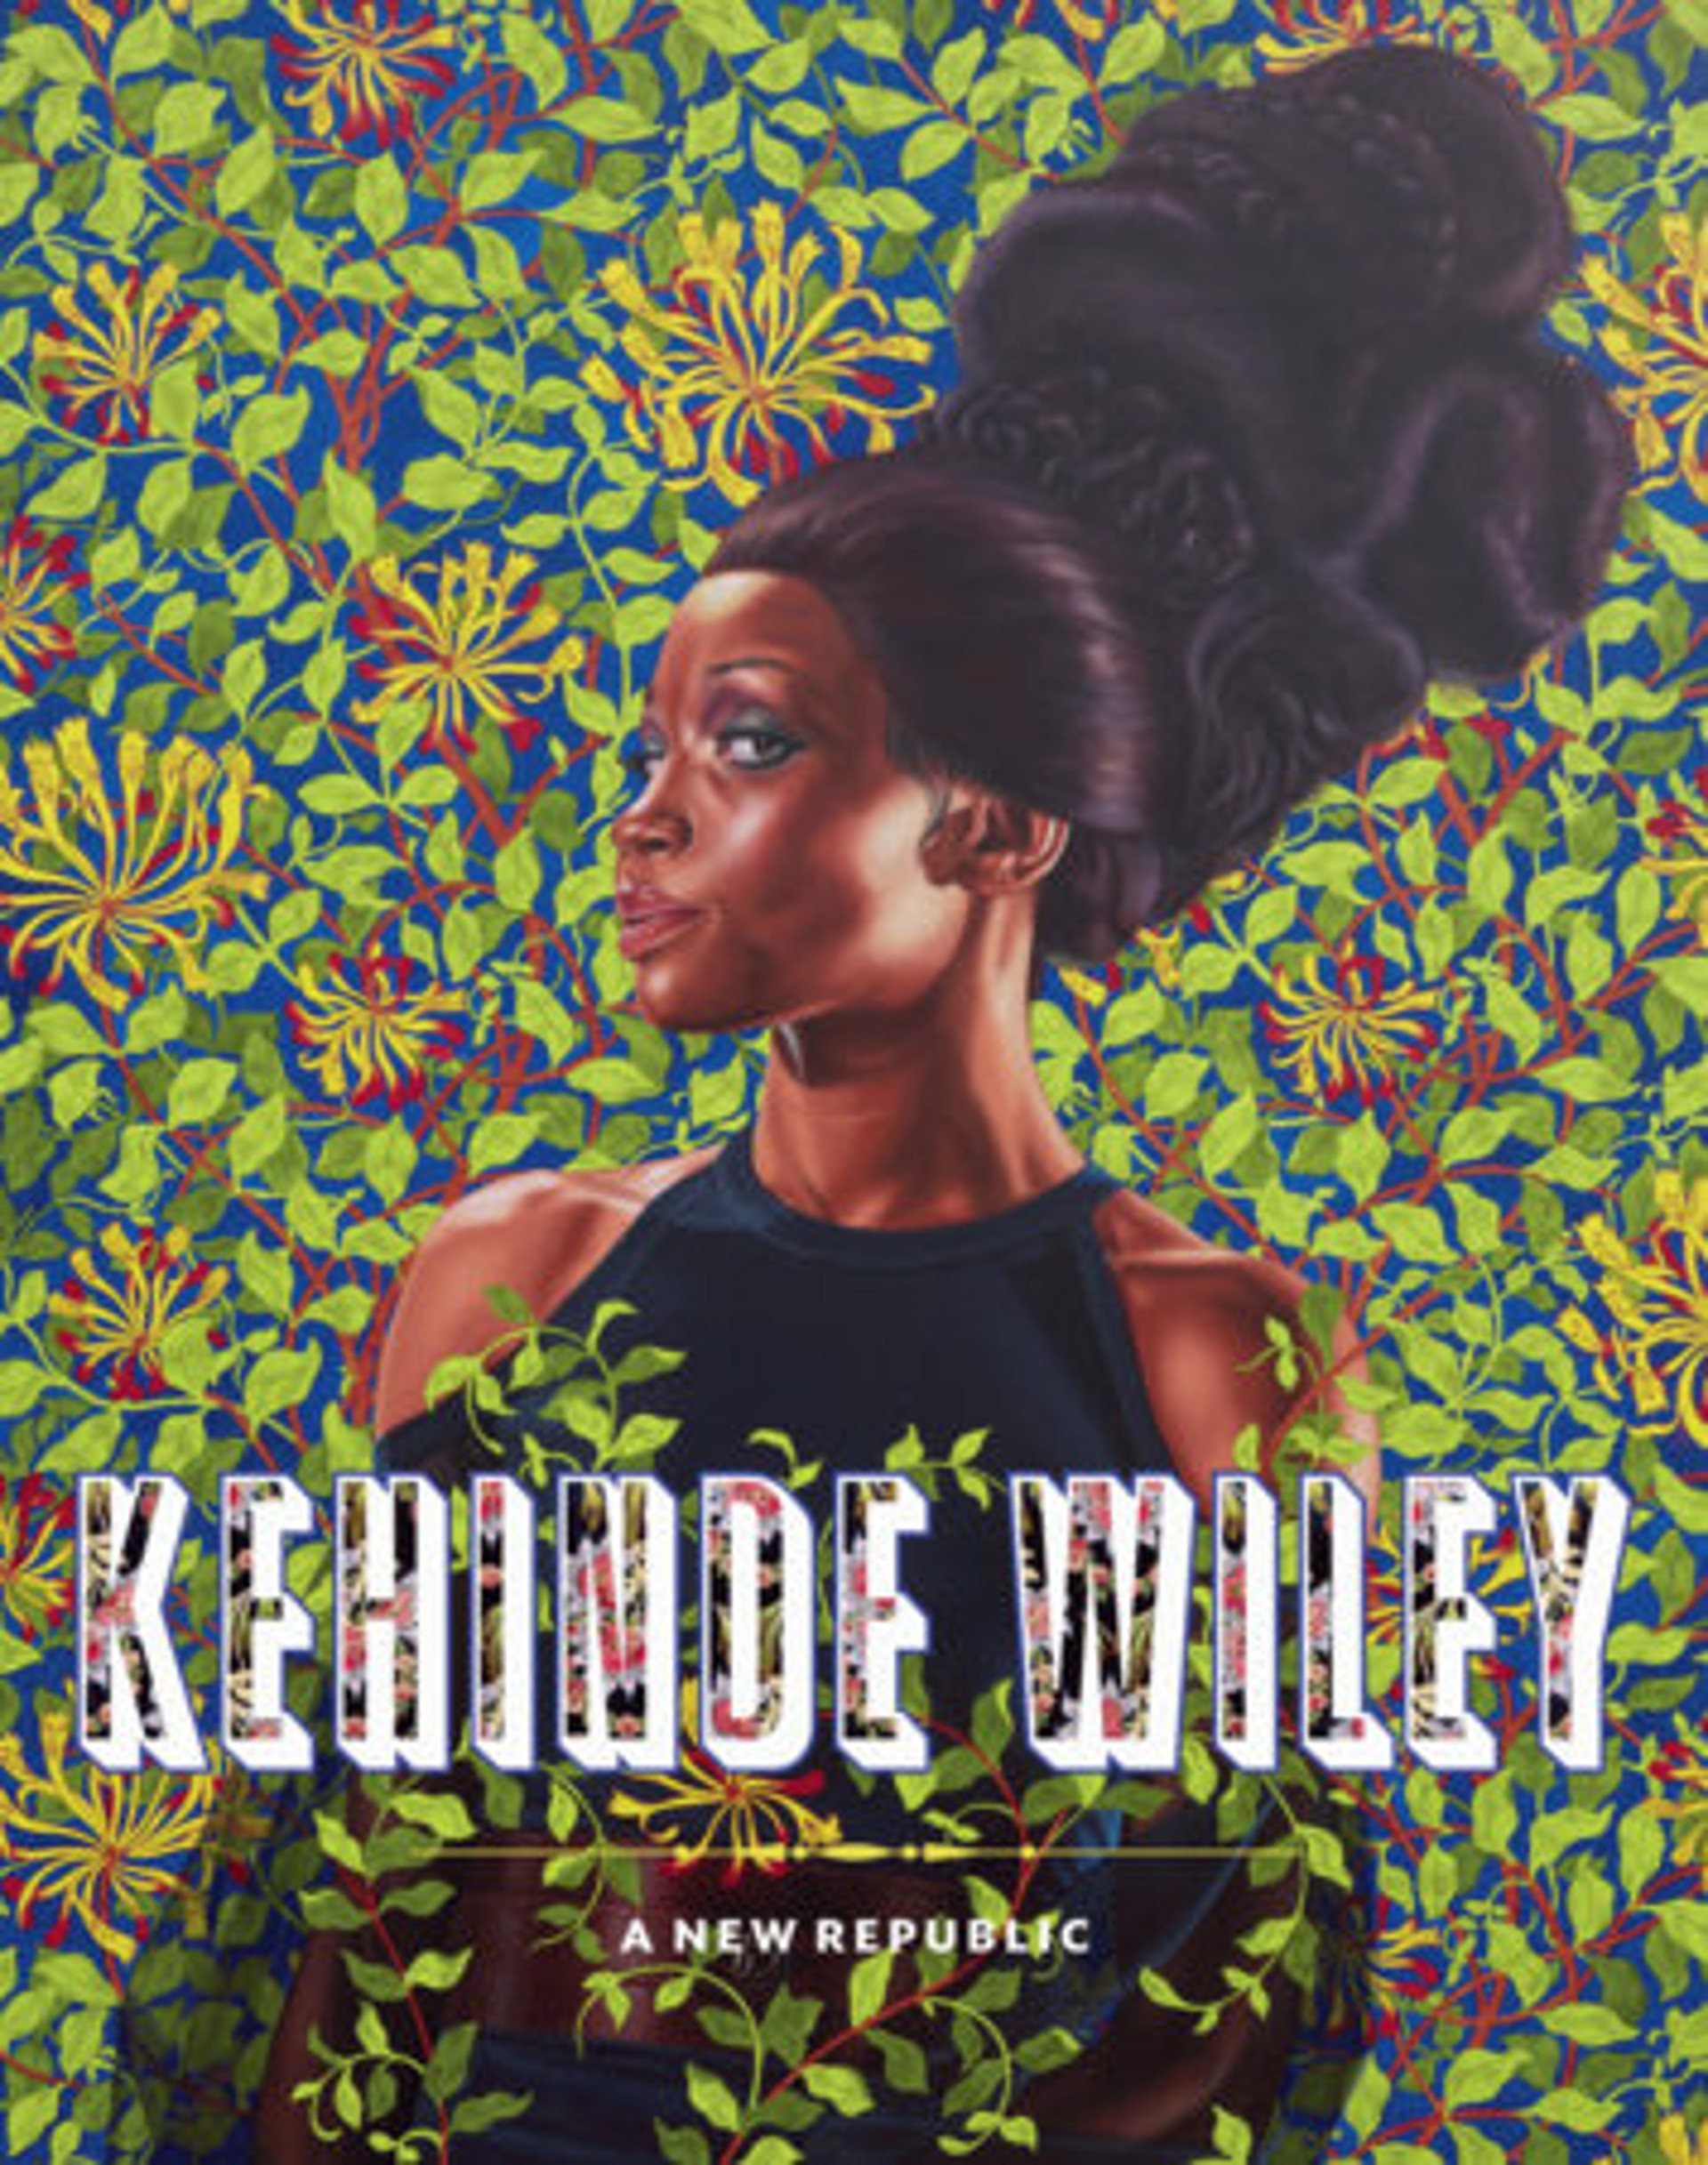 Kehinde Wiley- A New Republic by Kehinde Wiley